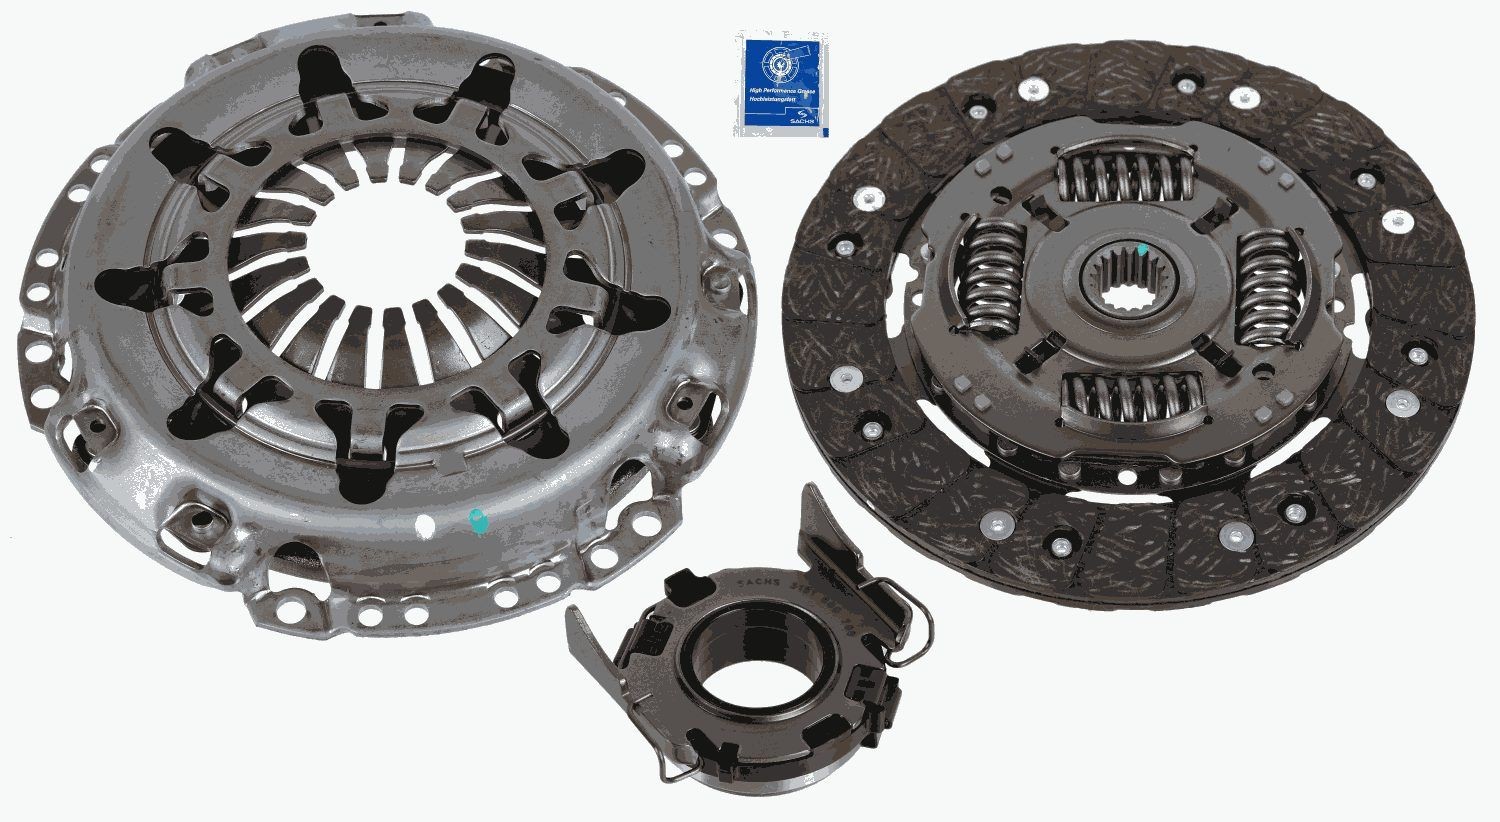 Toyota Clutch kit SACHS 3000 951 602 at a good price